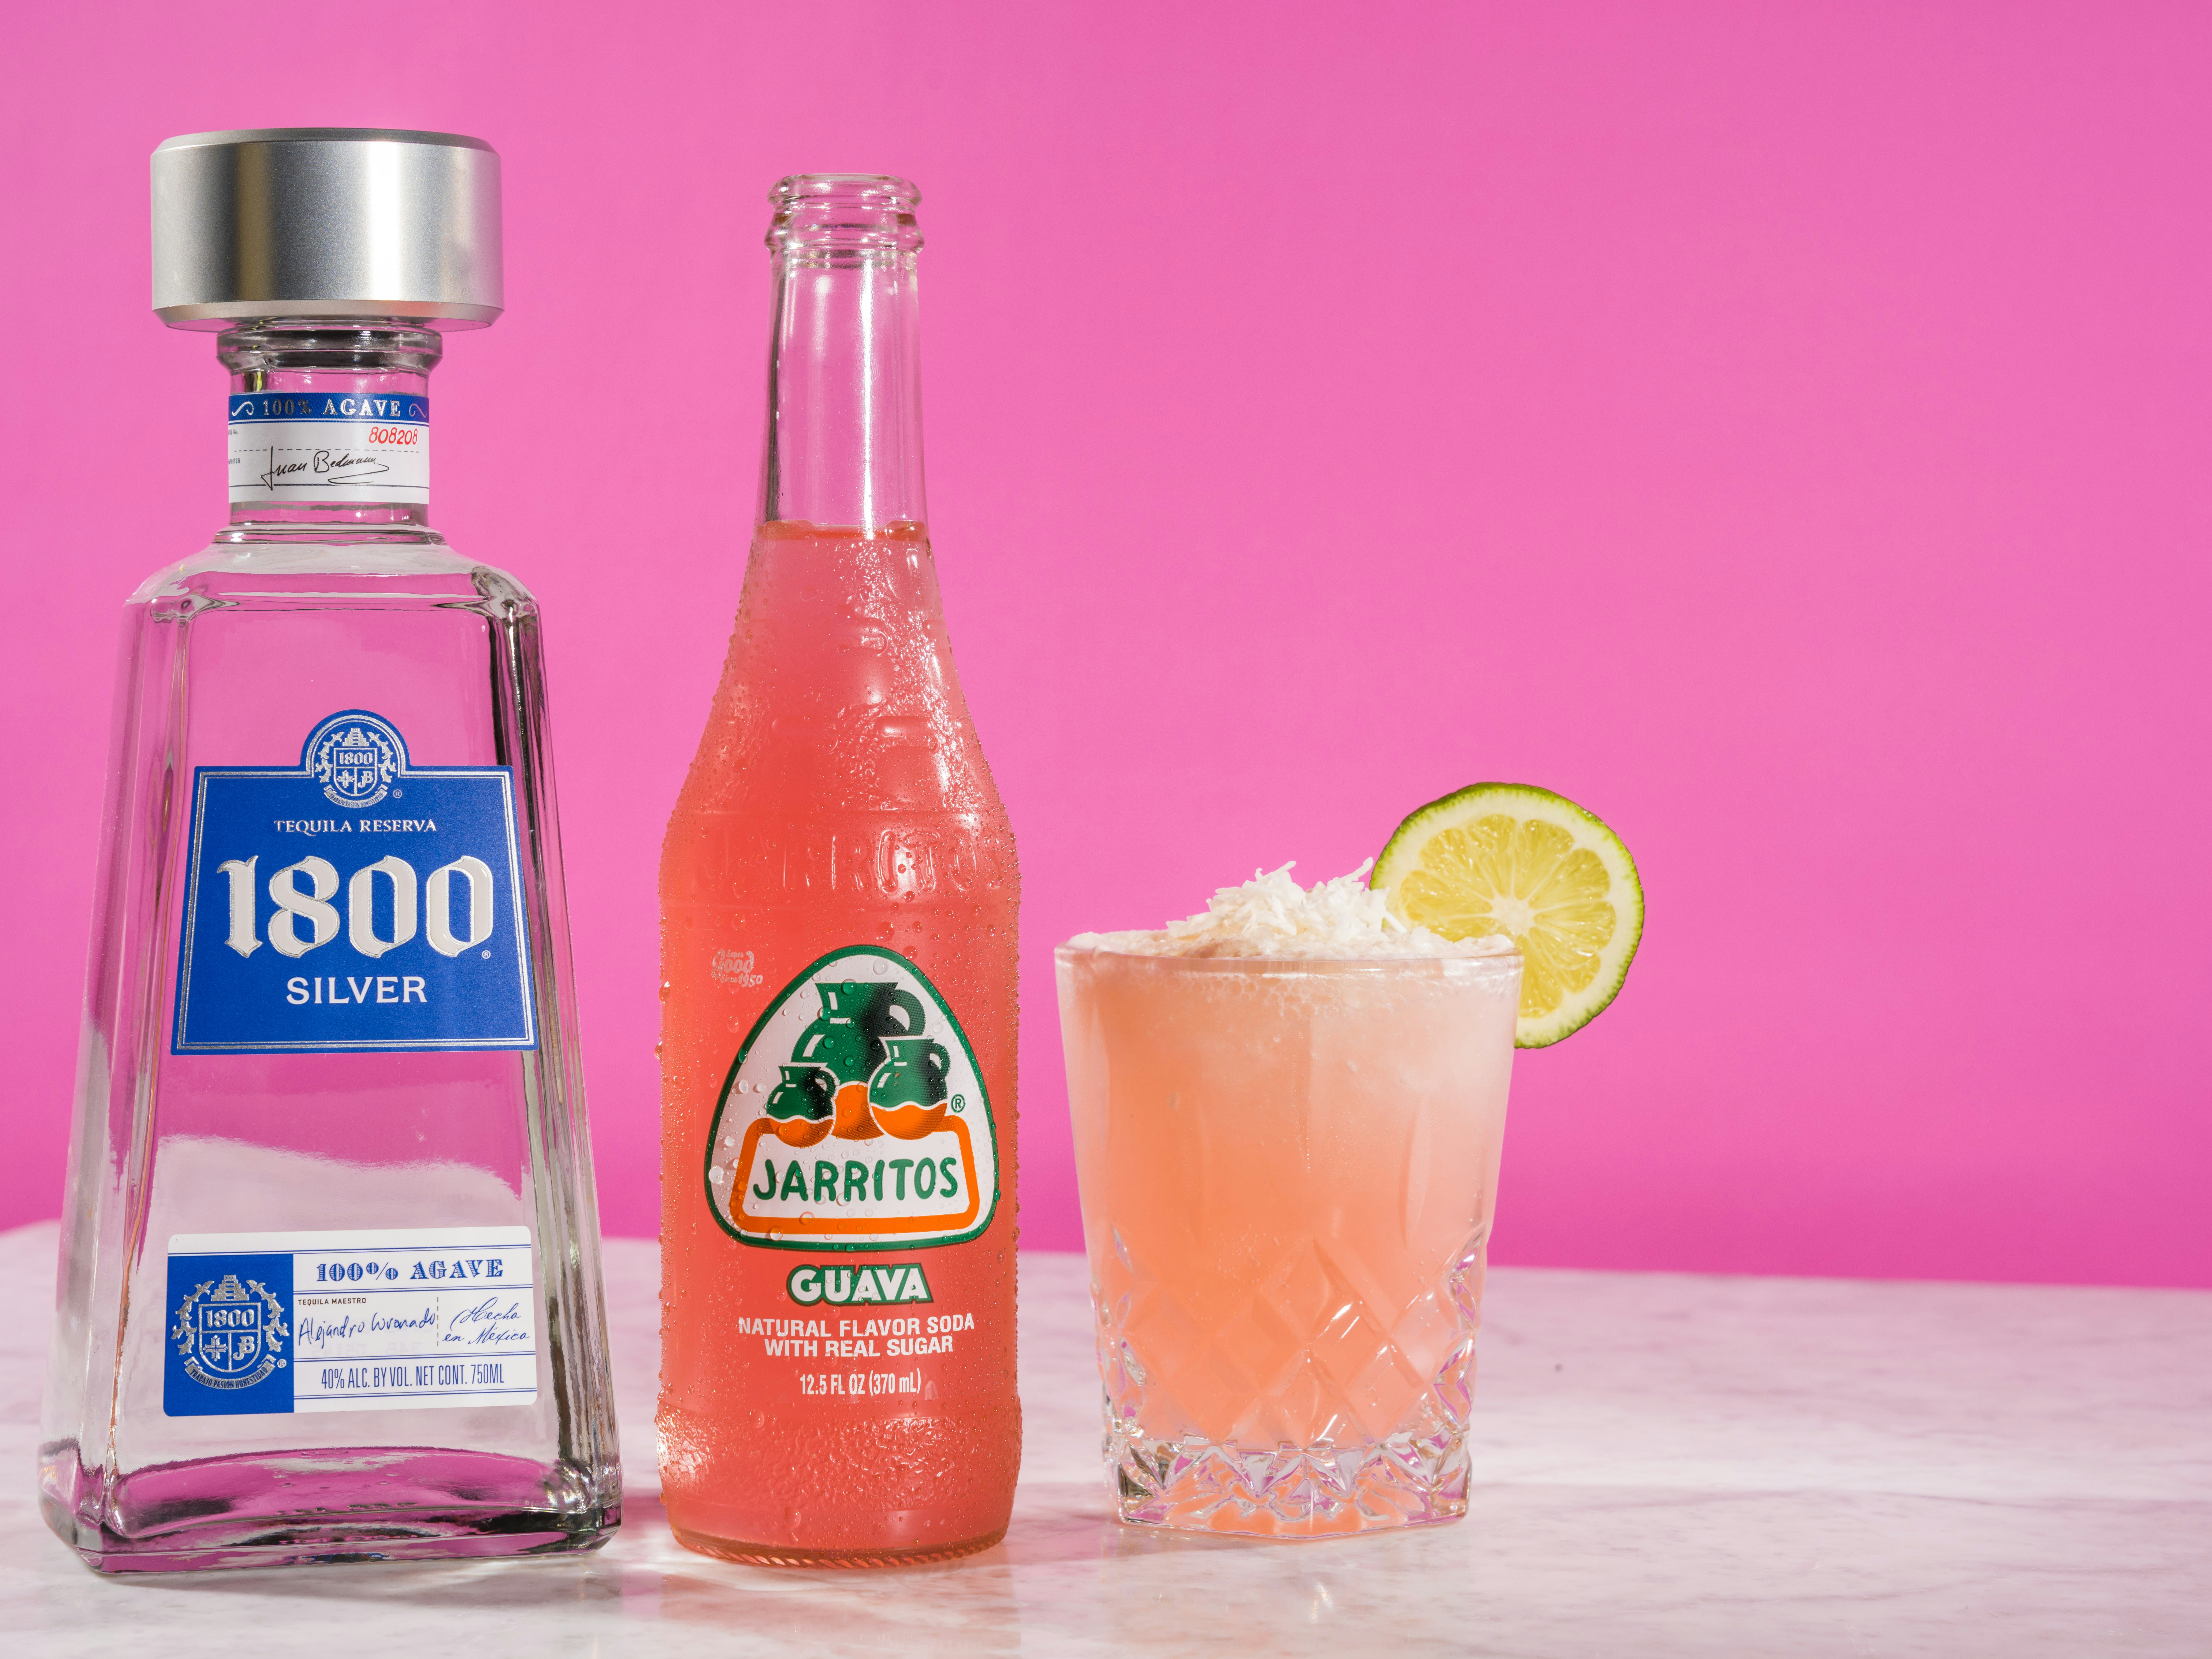 For a twist on the classic margarita, try a guava margarita. This is one of the best tequila cocktails for a fruity and lime combination. Pictured: A guava margarita